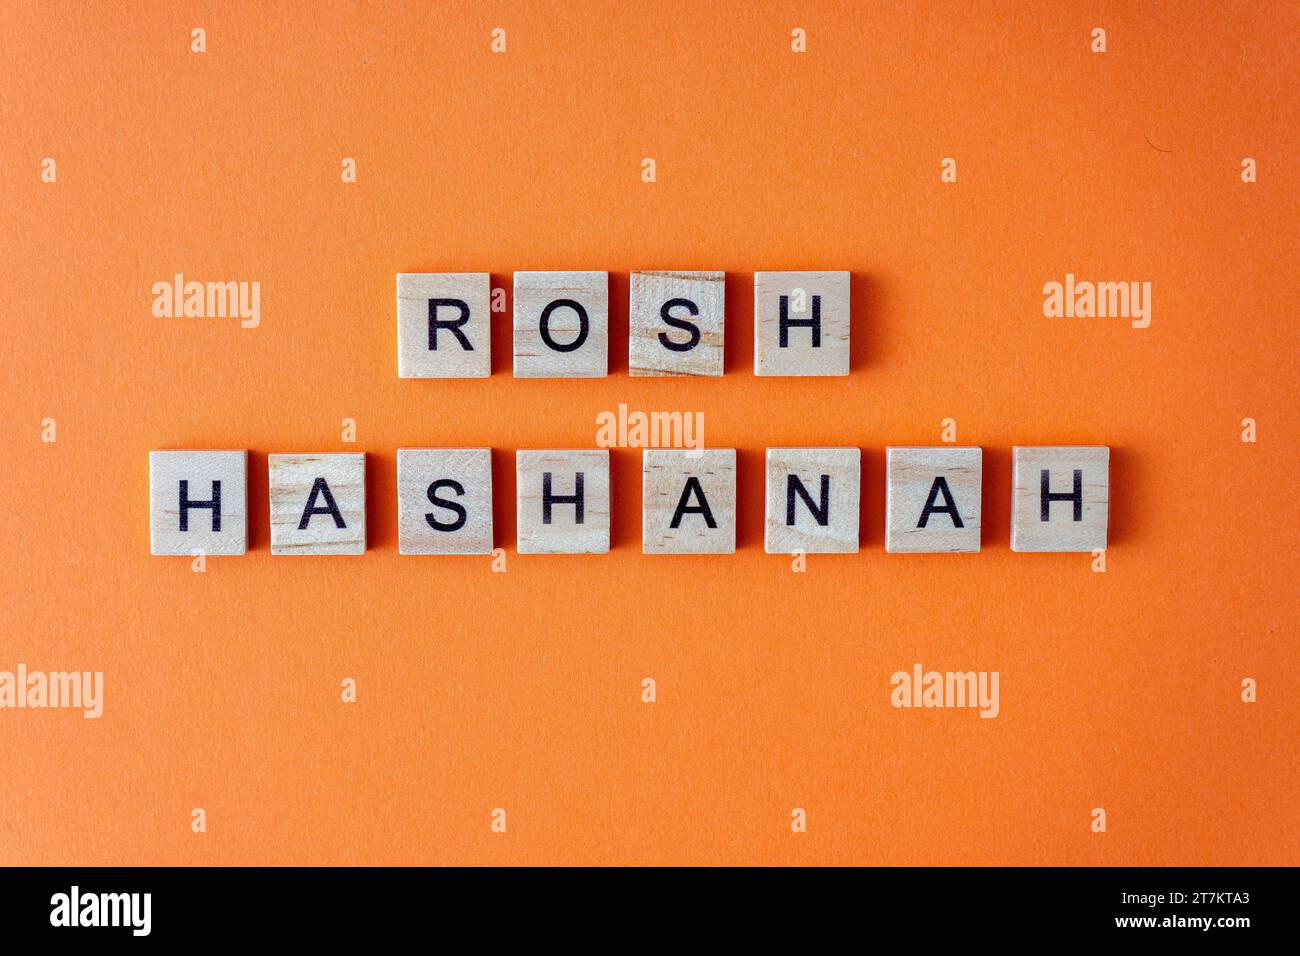 Rosh Hashanah word. The phrase is laid out in wooden letters top view. Orange flat lay background Stock Photo